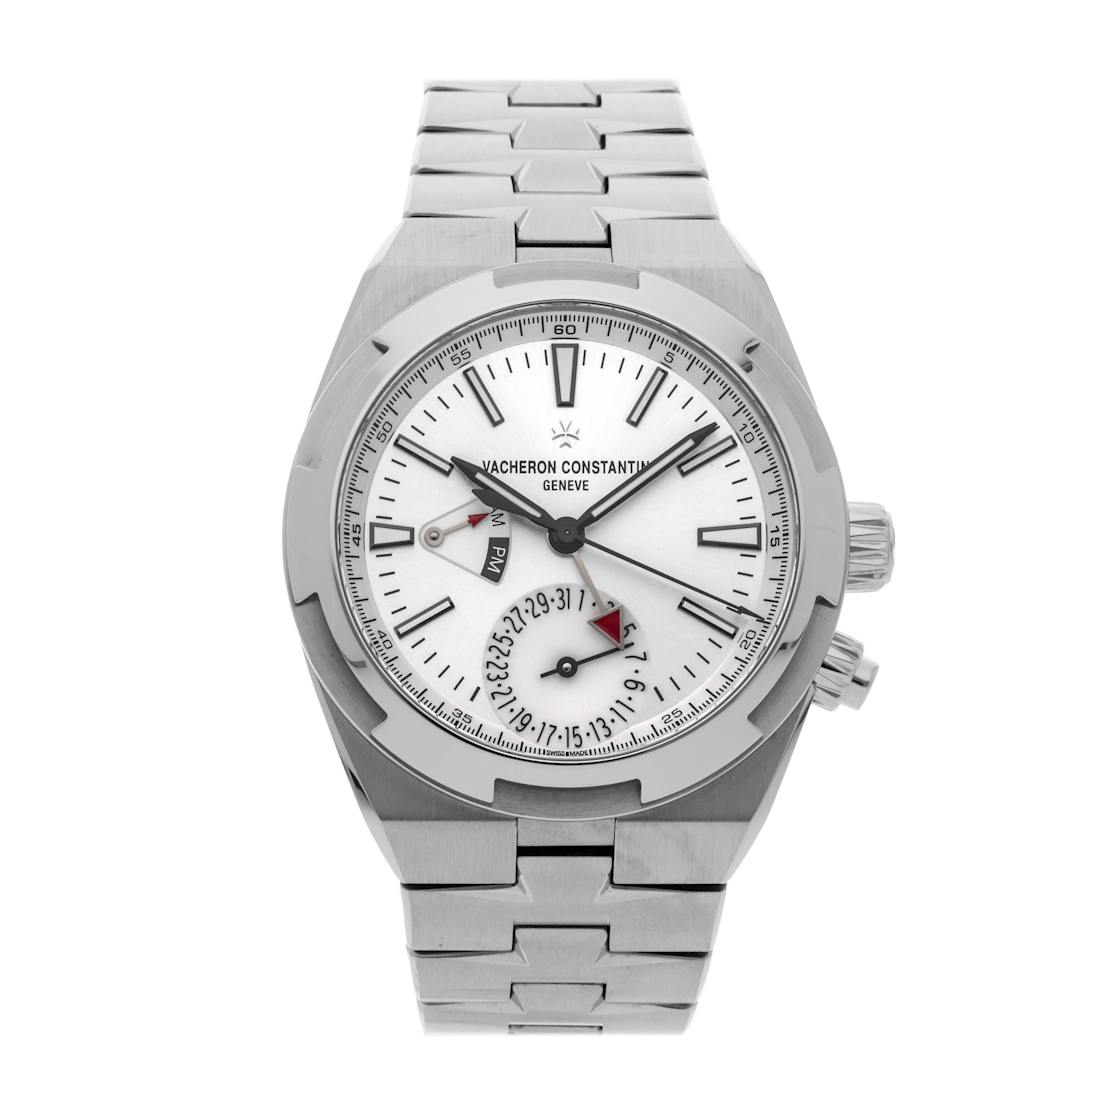 Vacheron Constantin Men's Overseas Dual Time Watch in Silver, Stainless Steel, Automatic | Govberg 7900V/110A-B333